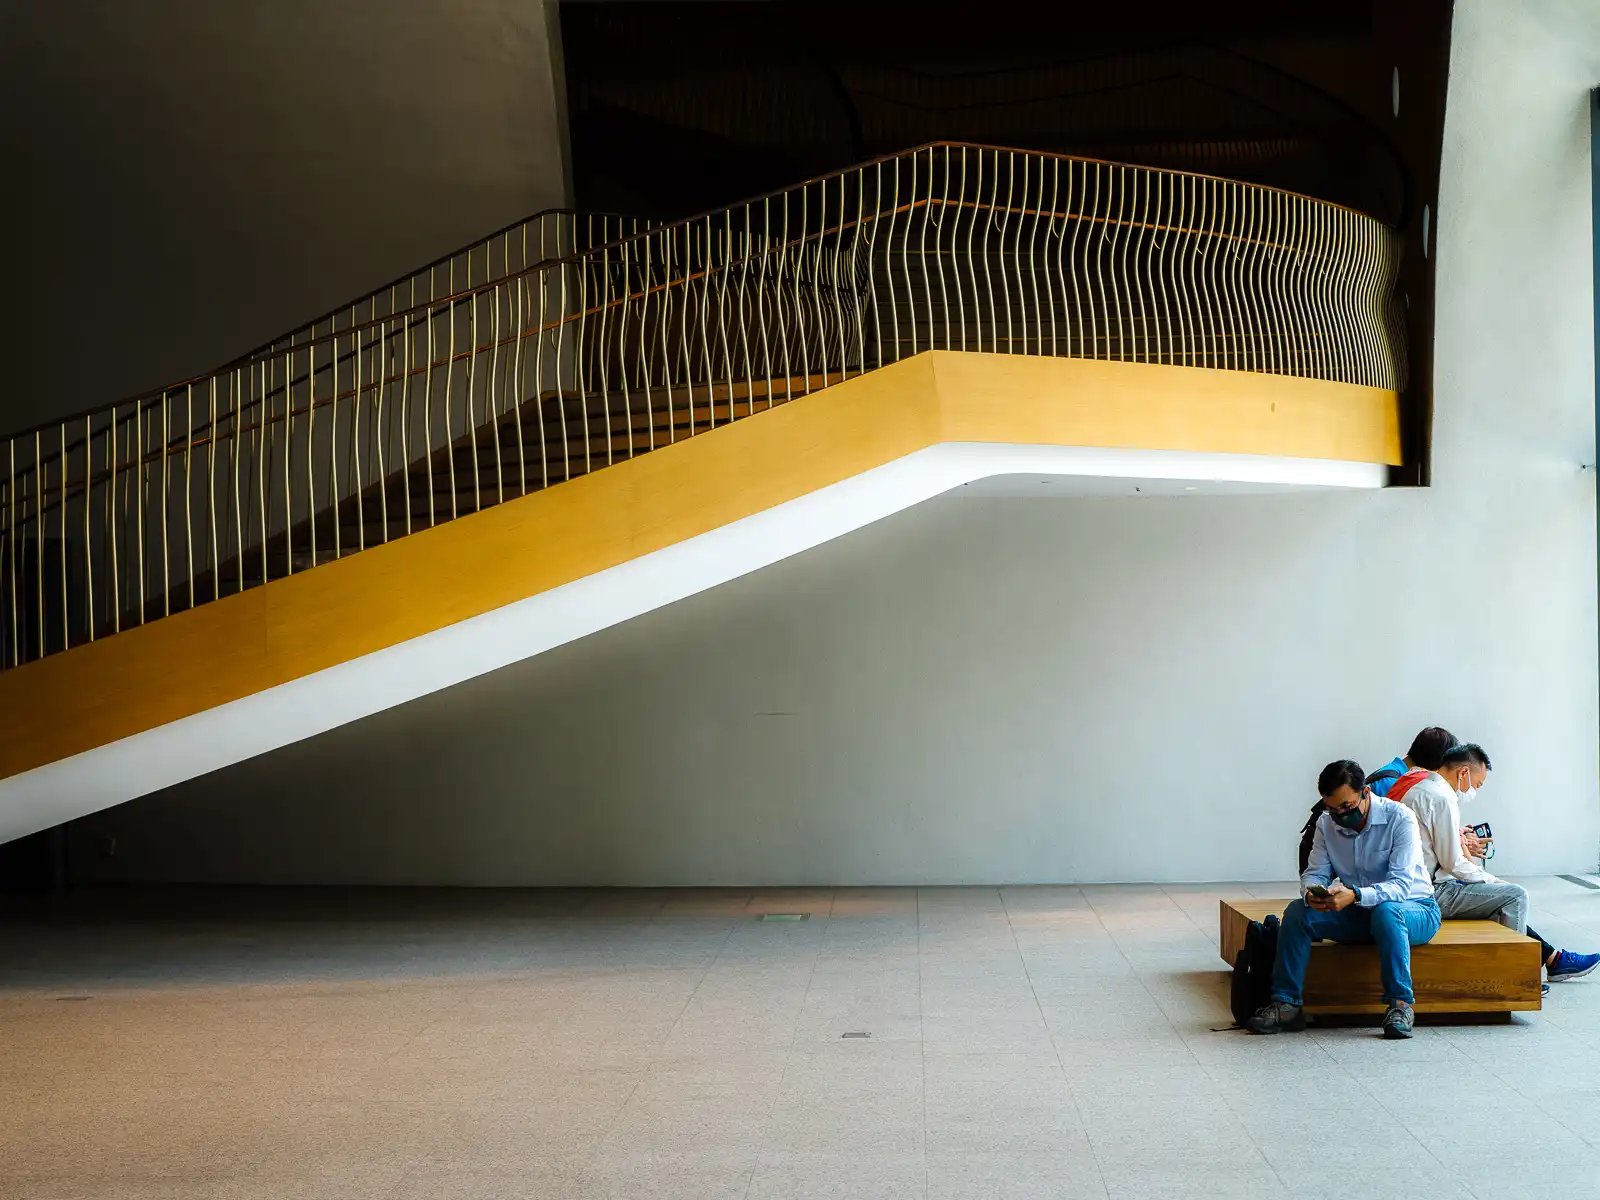 Visitors rest on benches in one of the large atriums of National Taichung Theater.